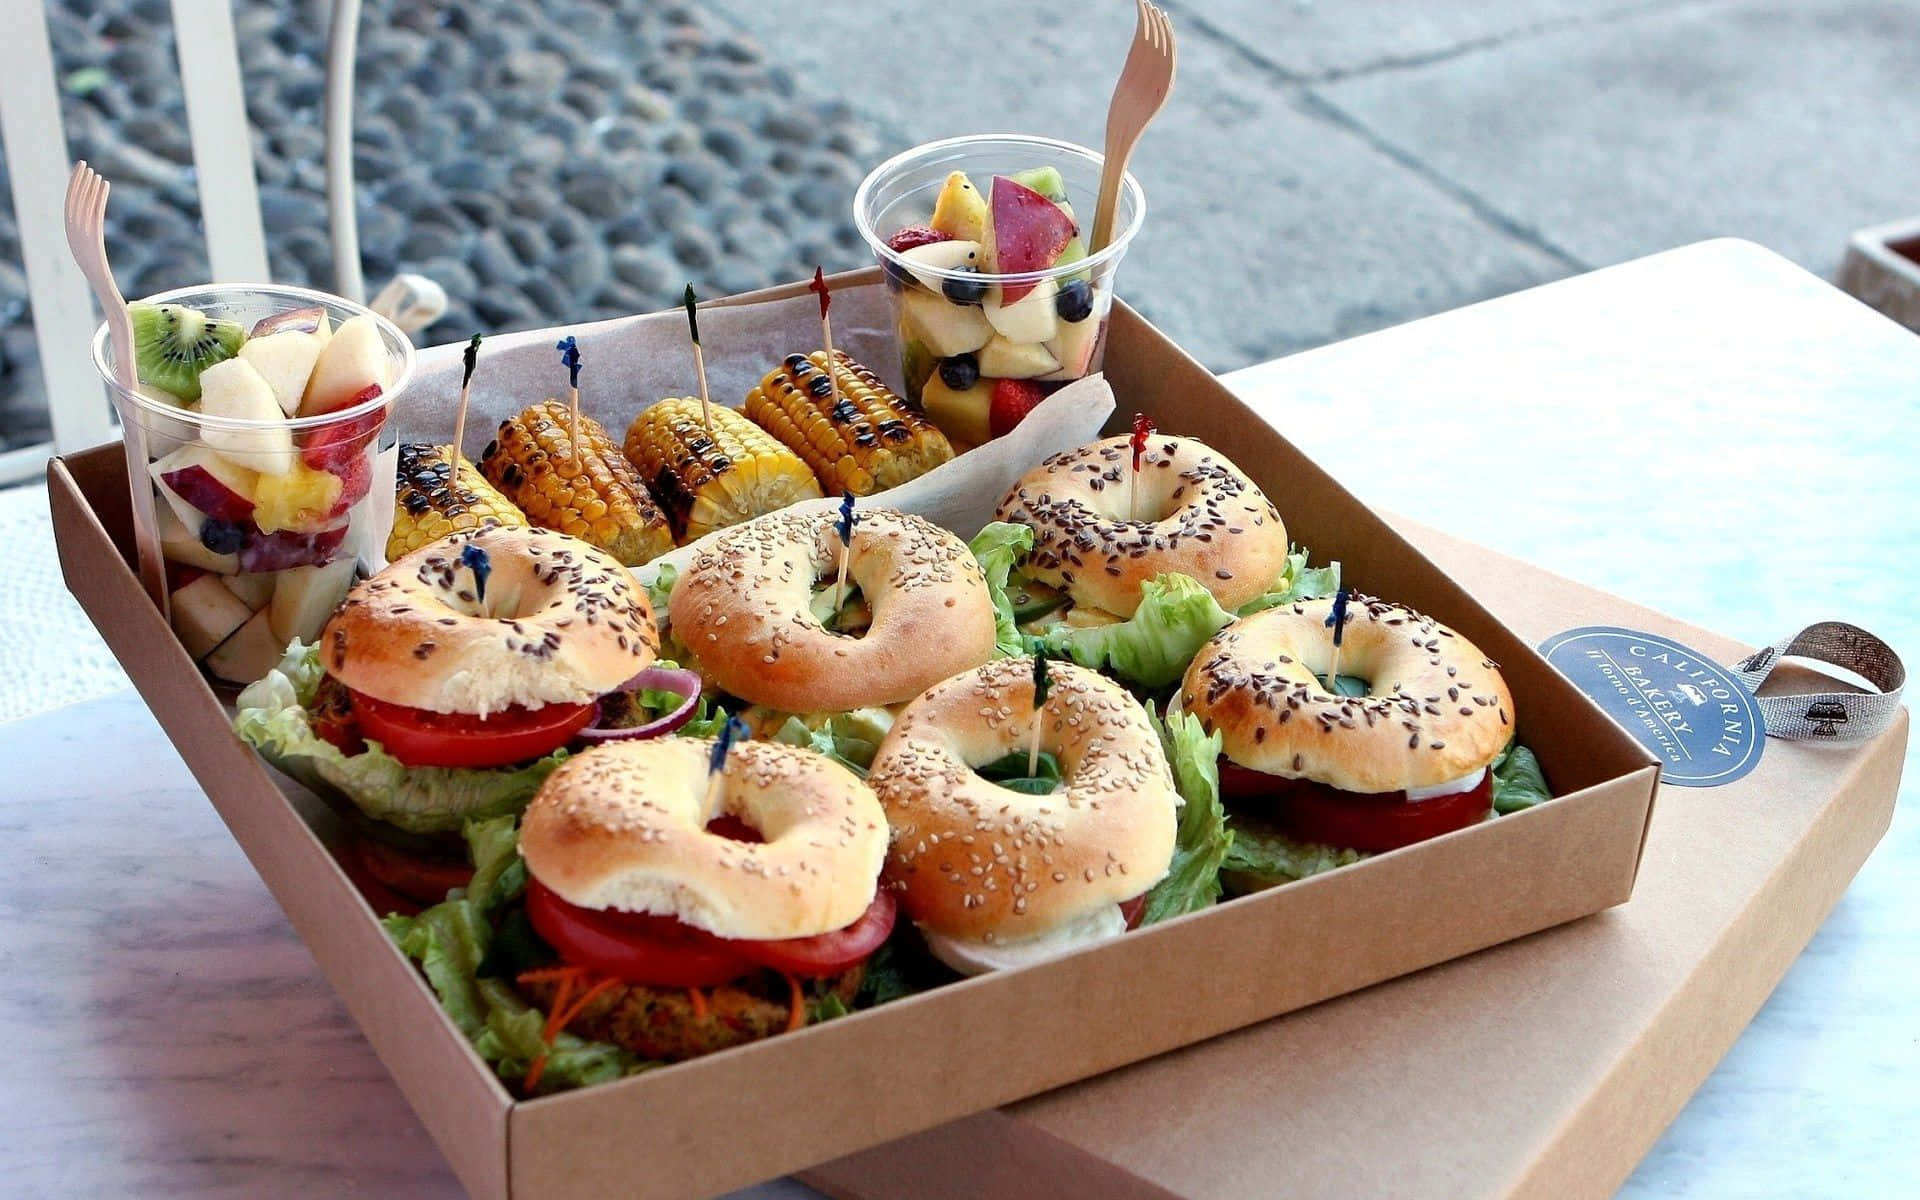 A Box Of Bagels With A Variety Of Toppings